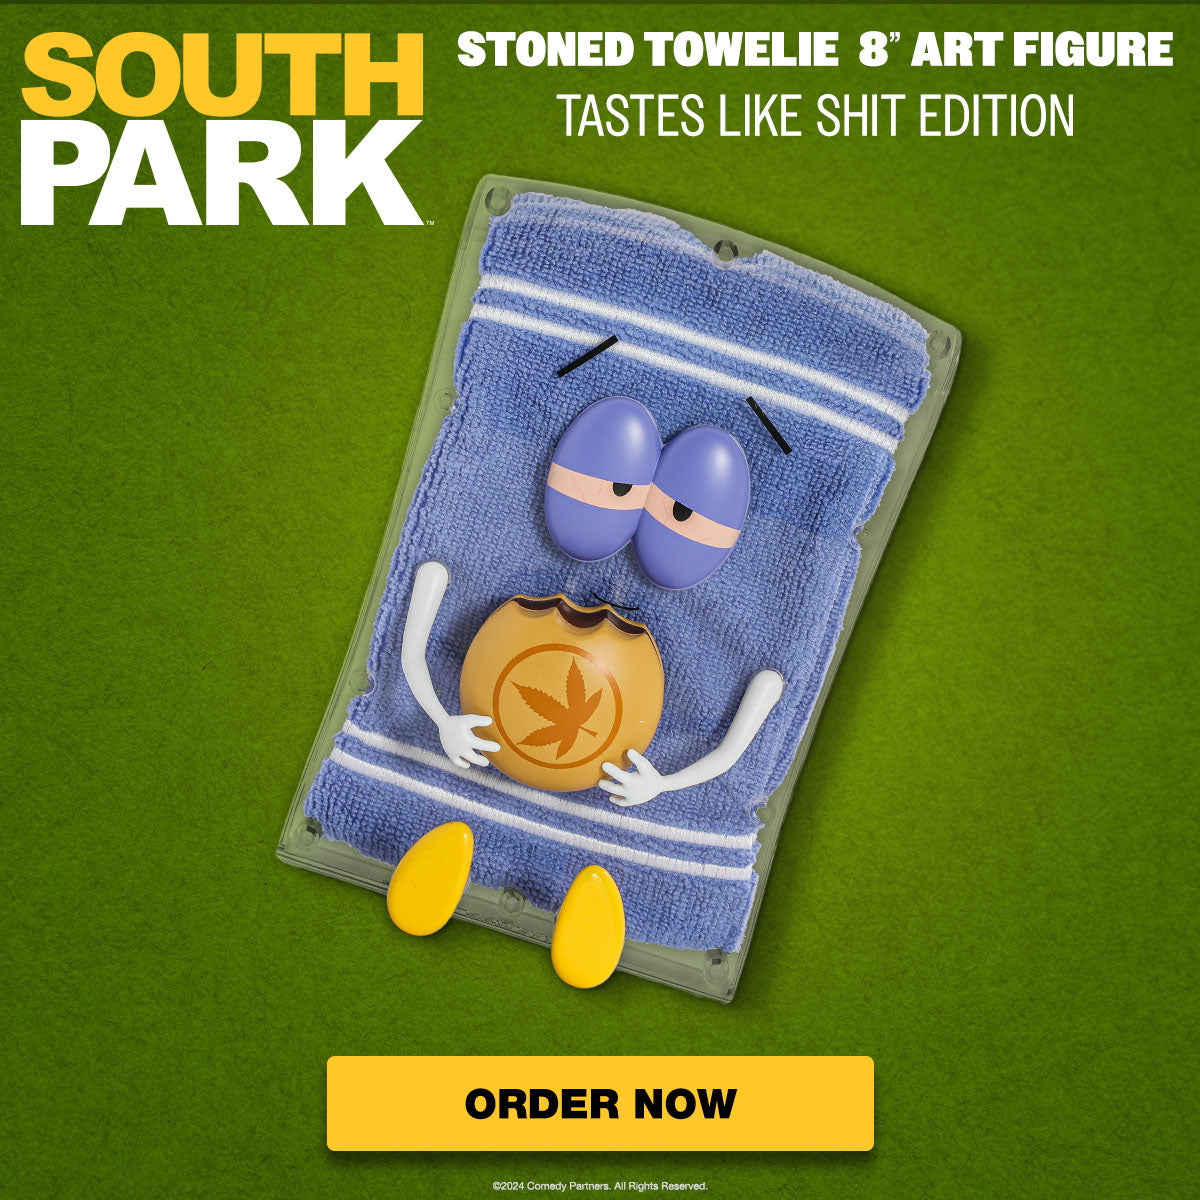 South Park Stoned Towelie with Tegridy Burger 8” Art Figure - Tastes Like Sh*t Edition (PRE-ORDER) - Kidrobot